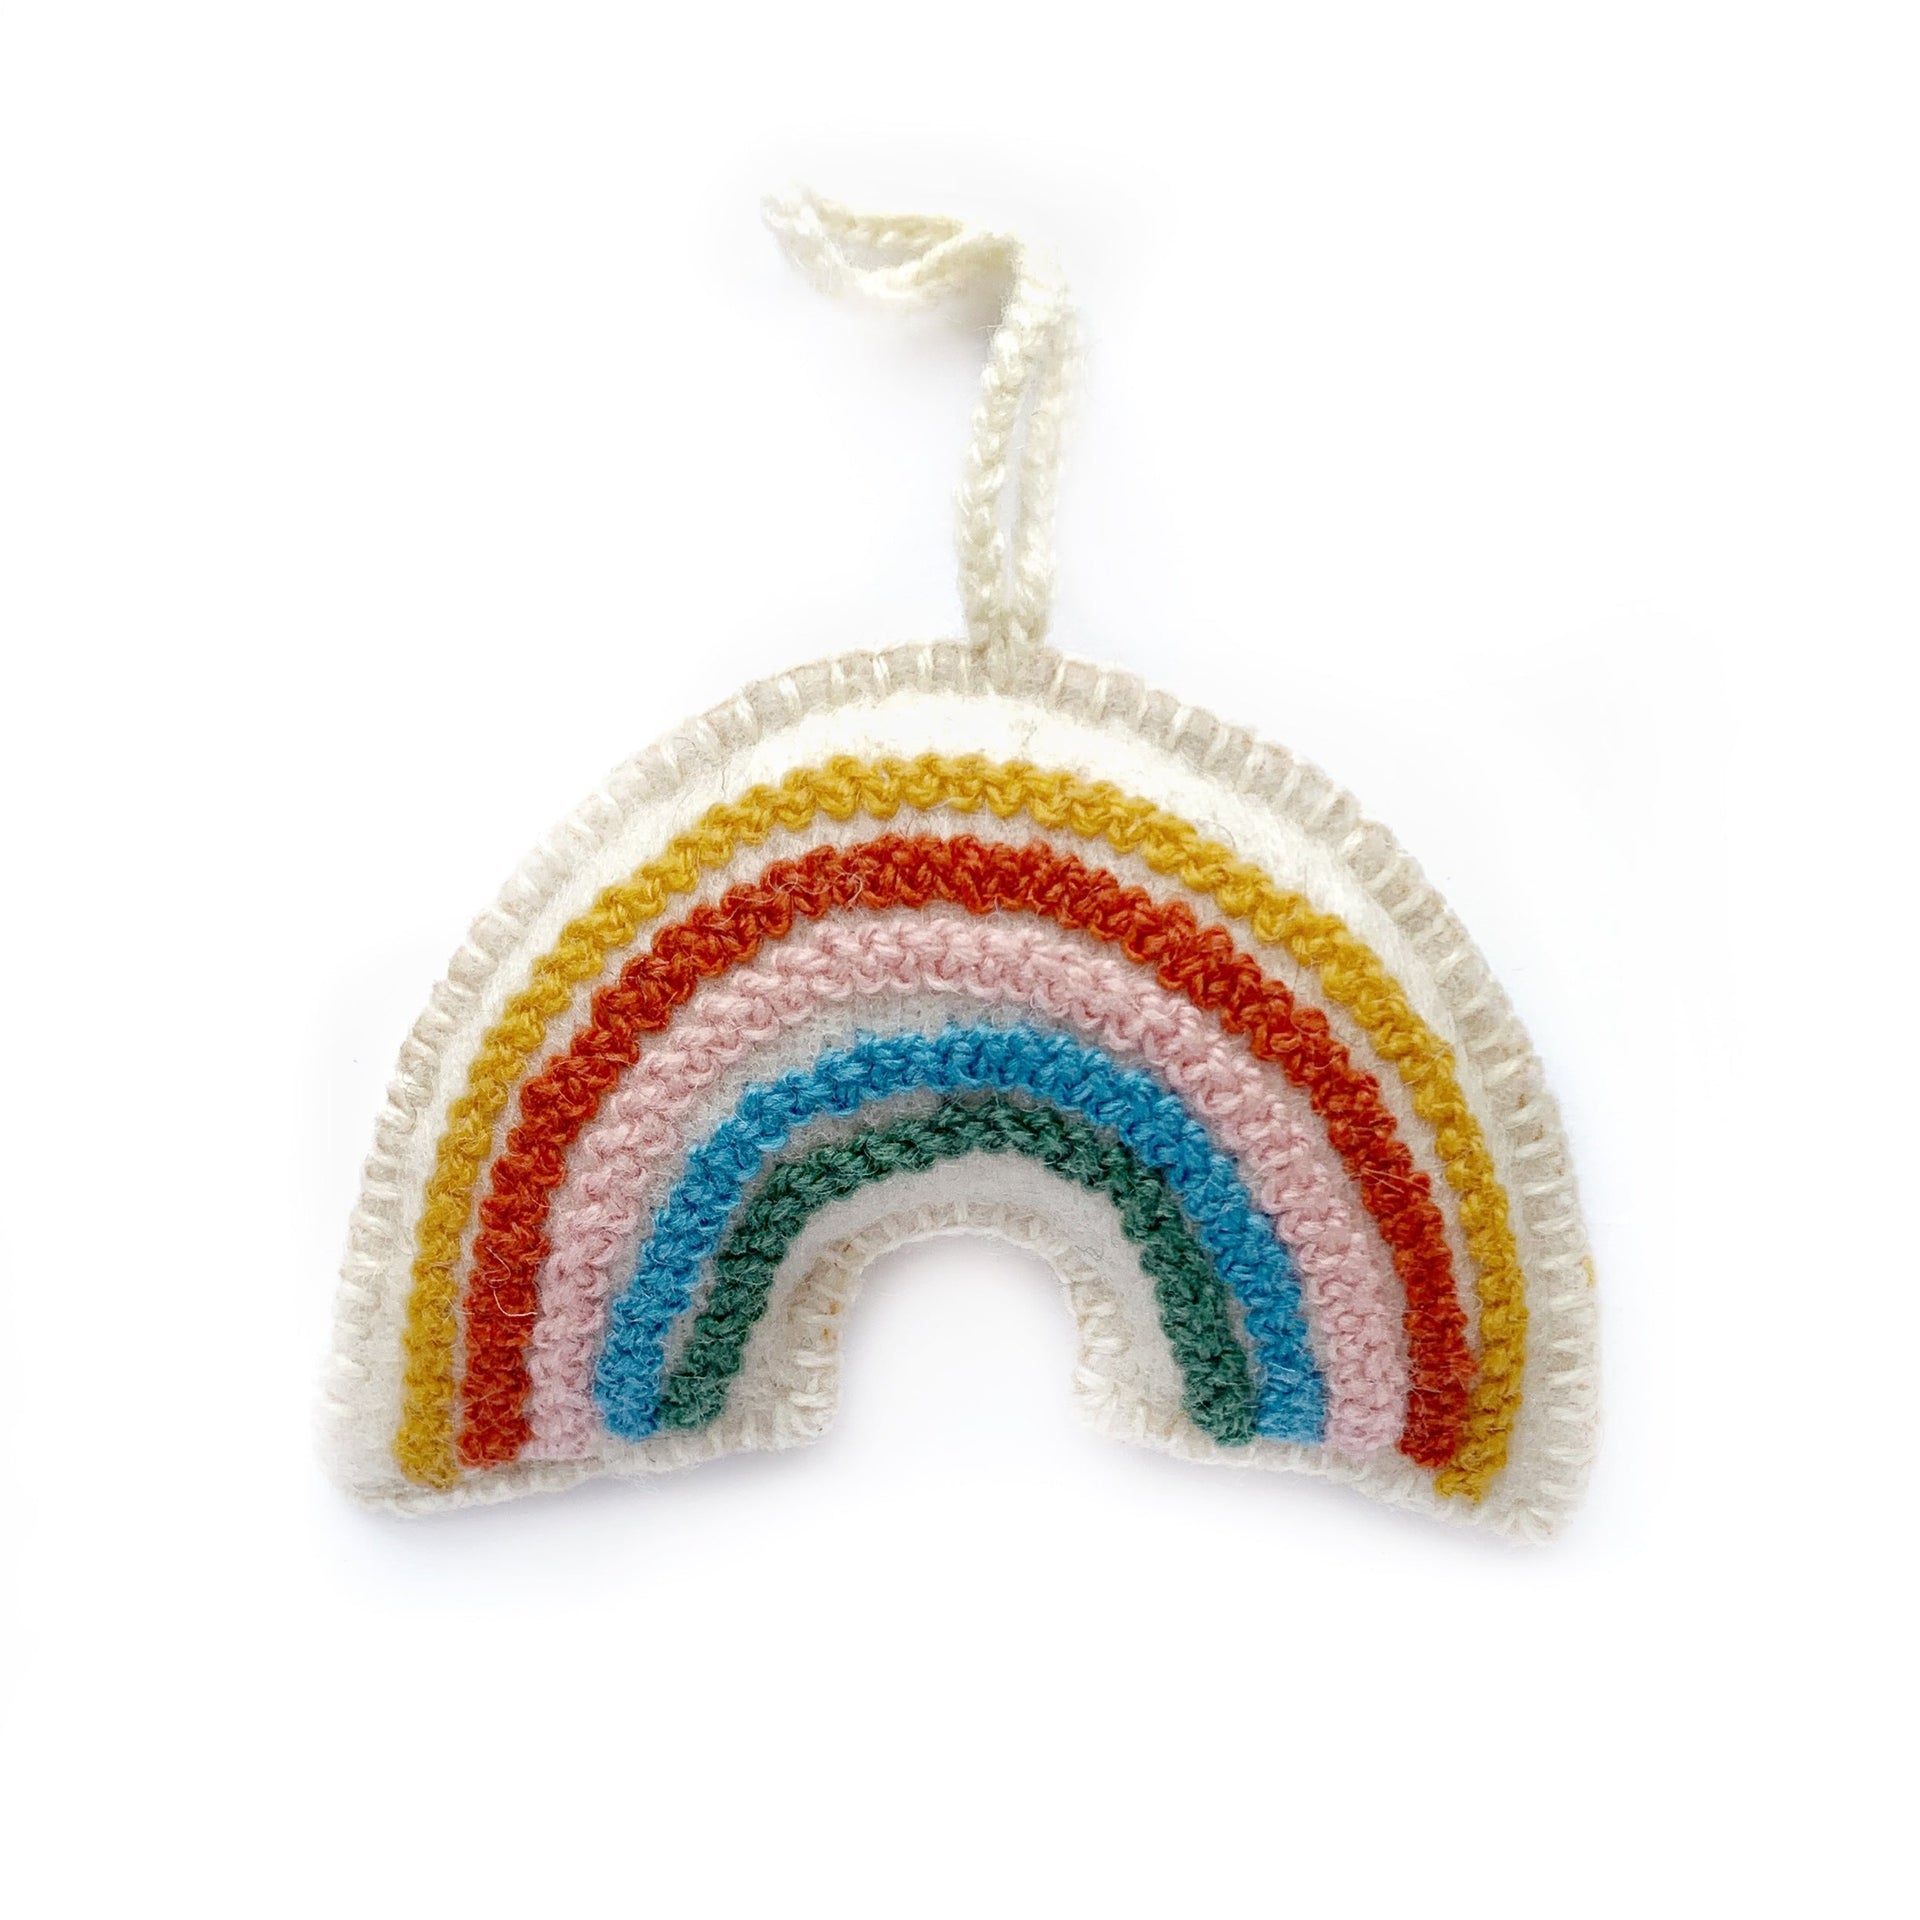 Hand embroidered wool rainbow ornament in pastel muted colors.